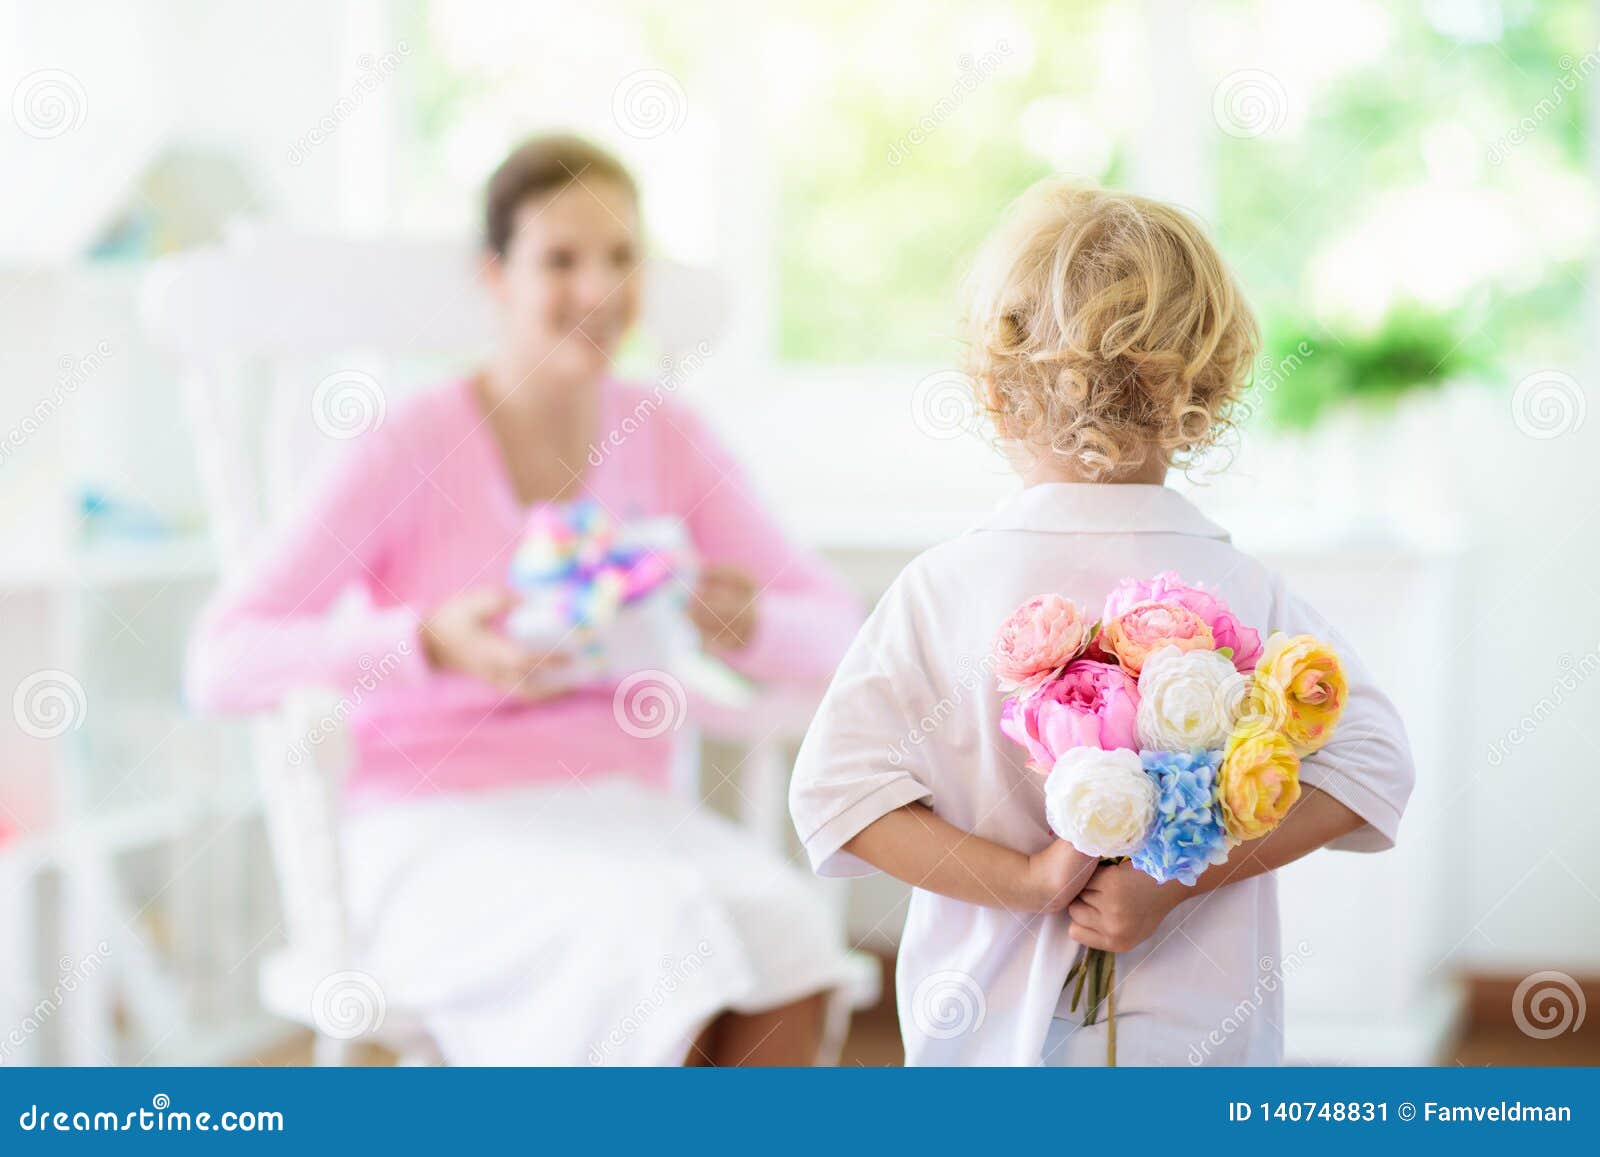 happy mothers day. child with present for mom